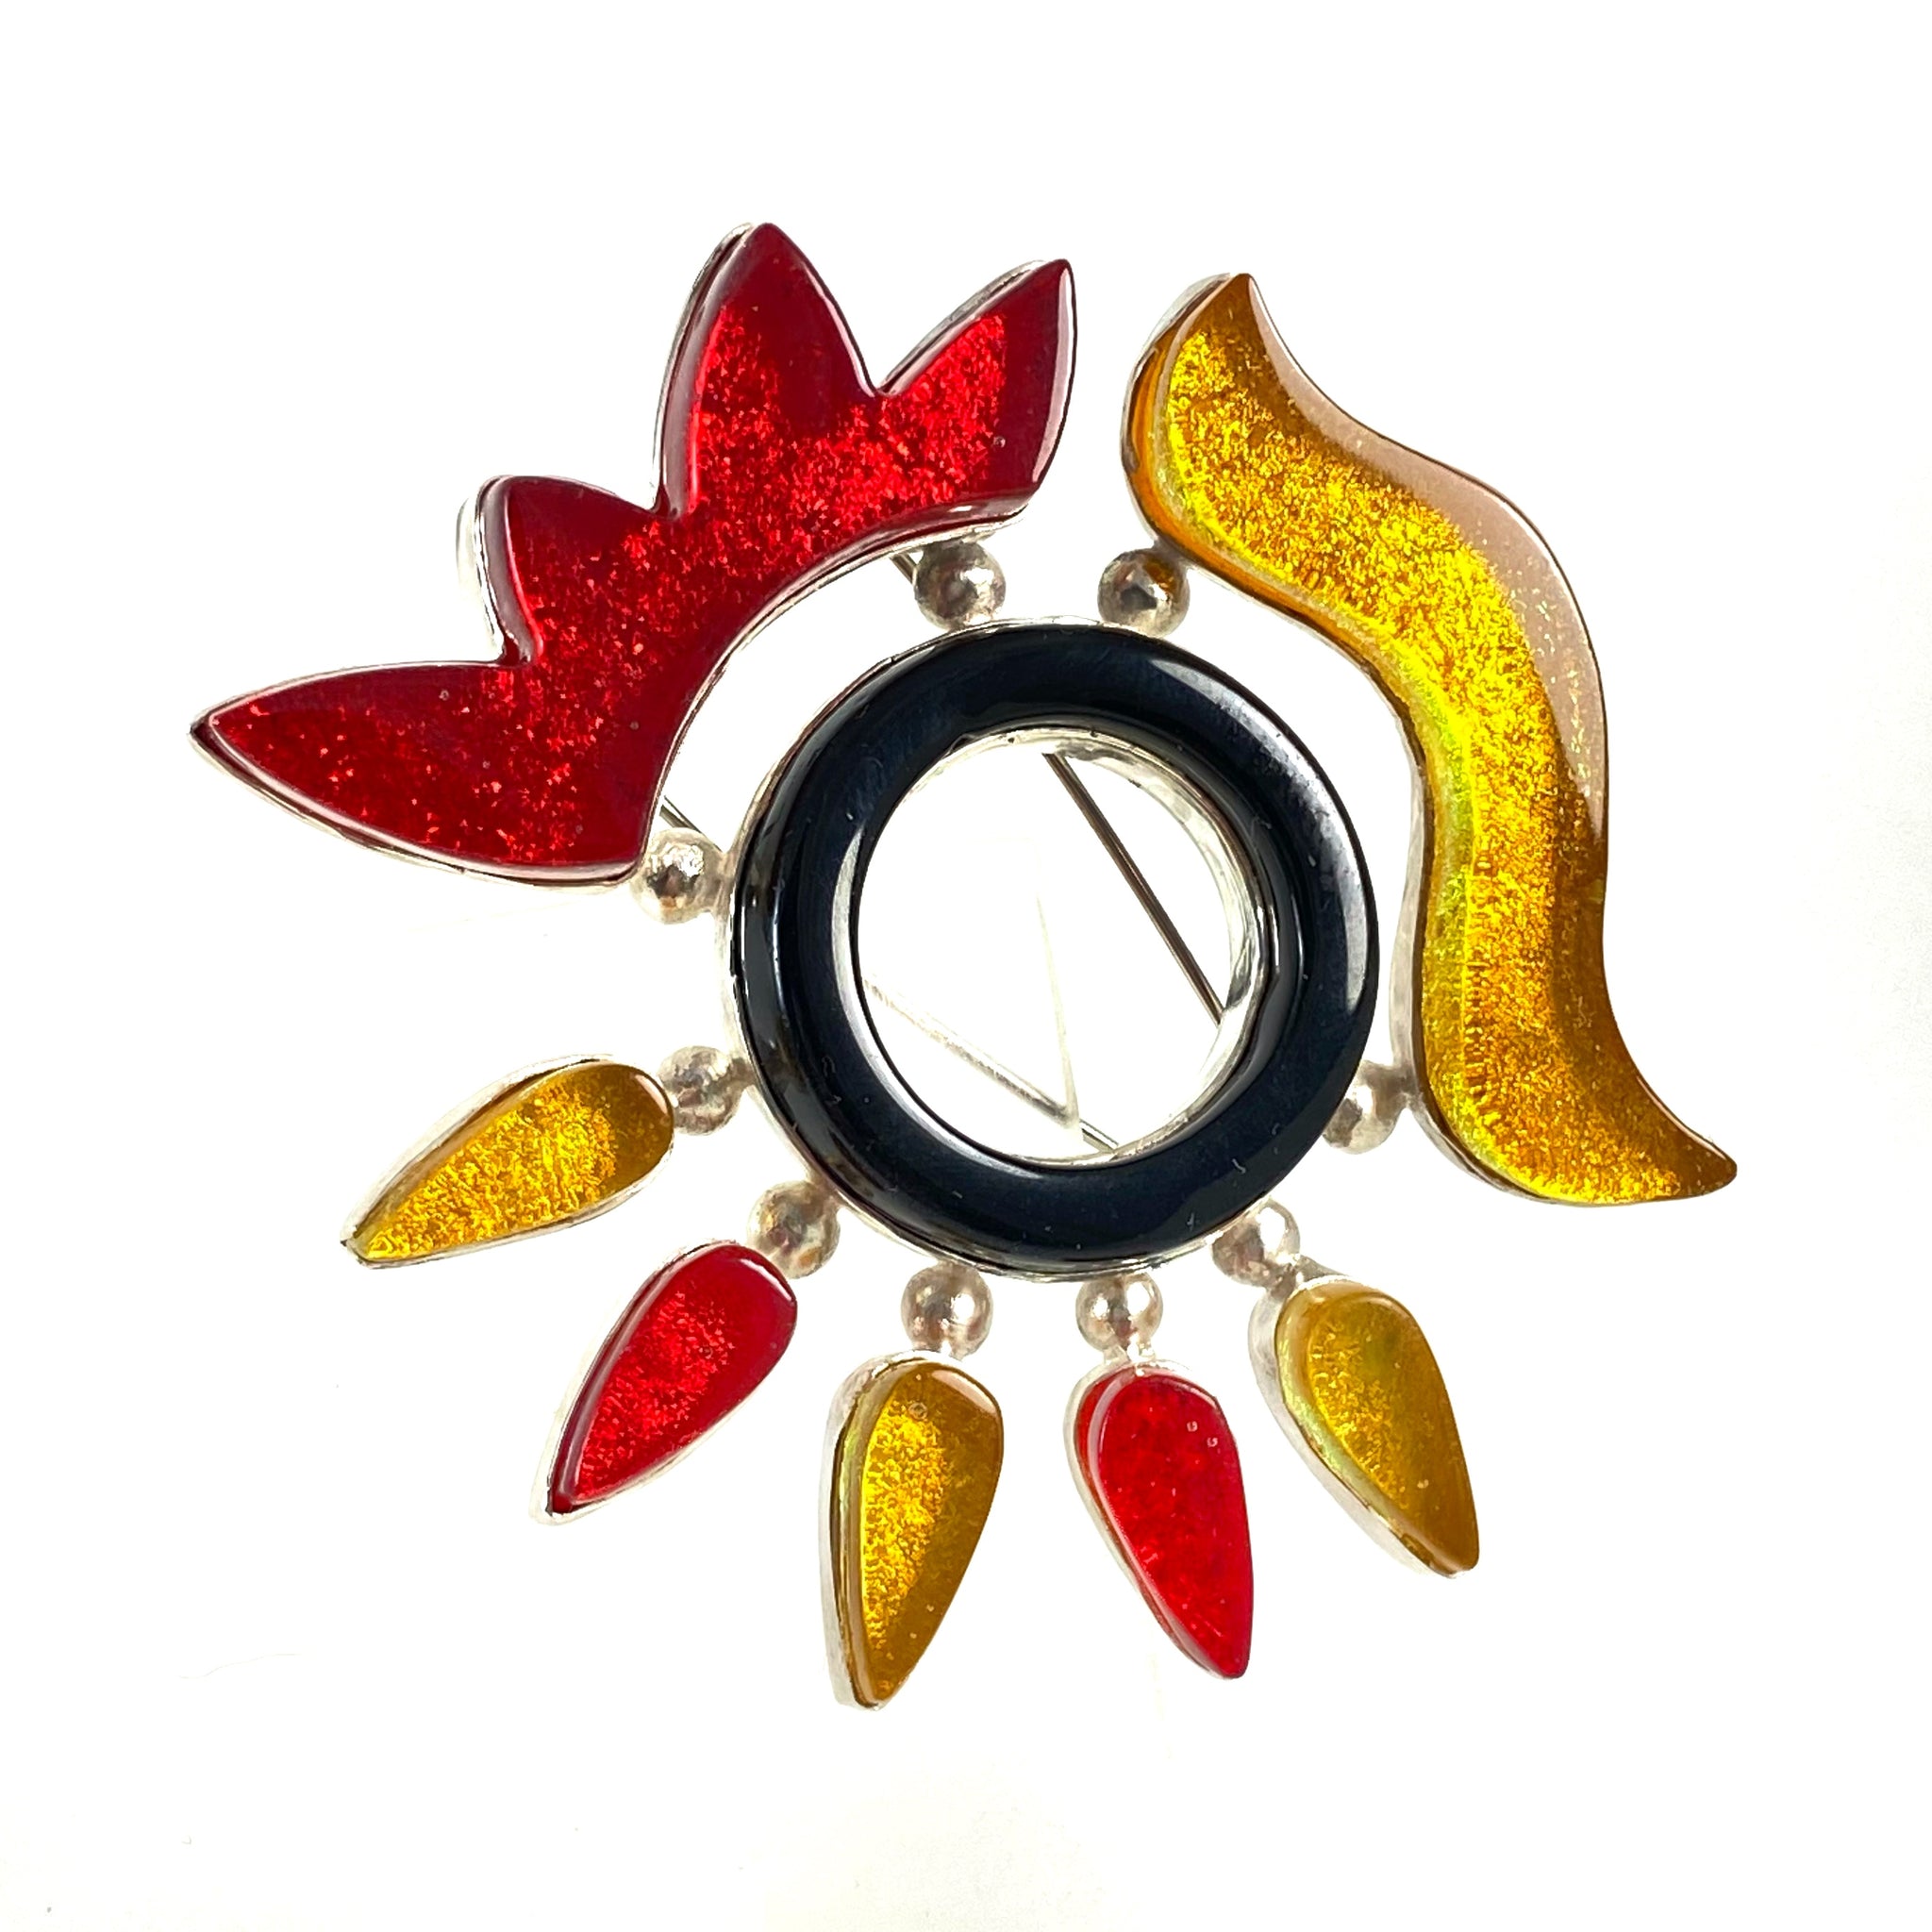 hand cut yellow and red abstract elements and water jet black glass circle brooch, fused glass, glass jewelry, glass and silver jewelry, handmade, handcrafted, American Craft, hand fabricated jewelry, hand fabricated jewellery, Athen, Georgia, colorful jewelry, sparkle, bullseye glass, dichroic glass, art jewelry